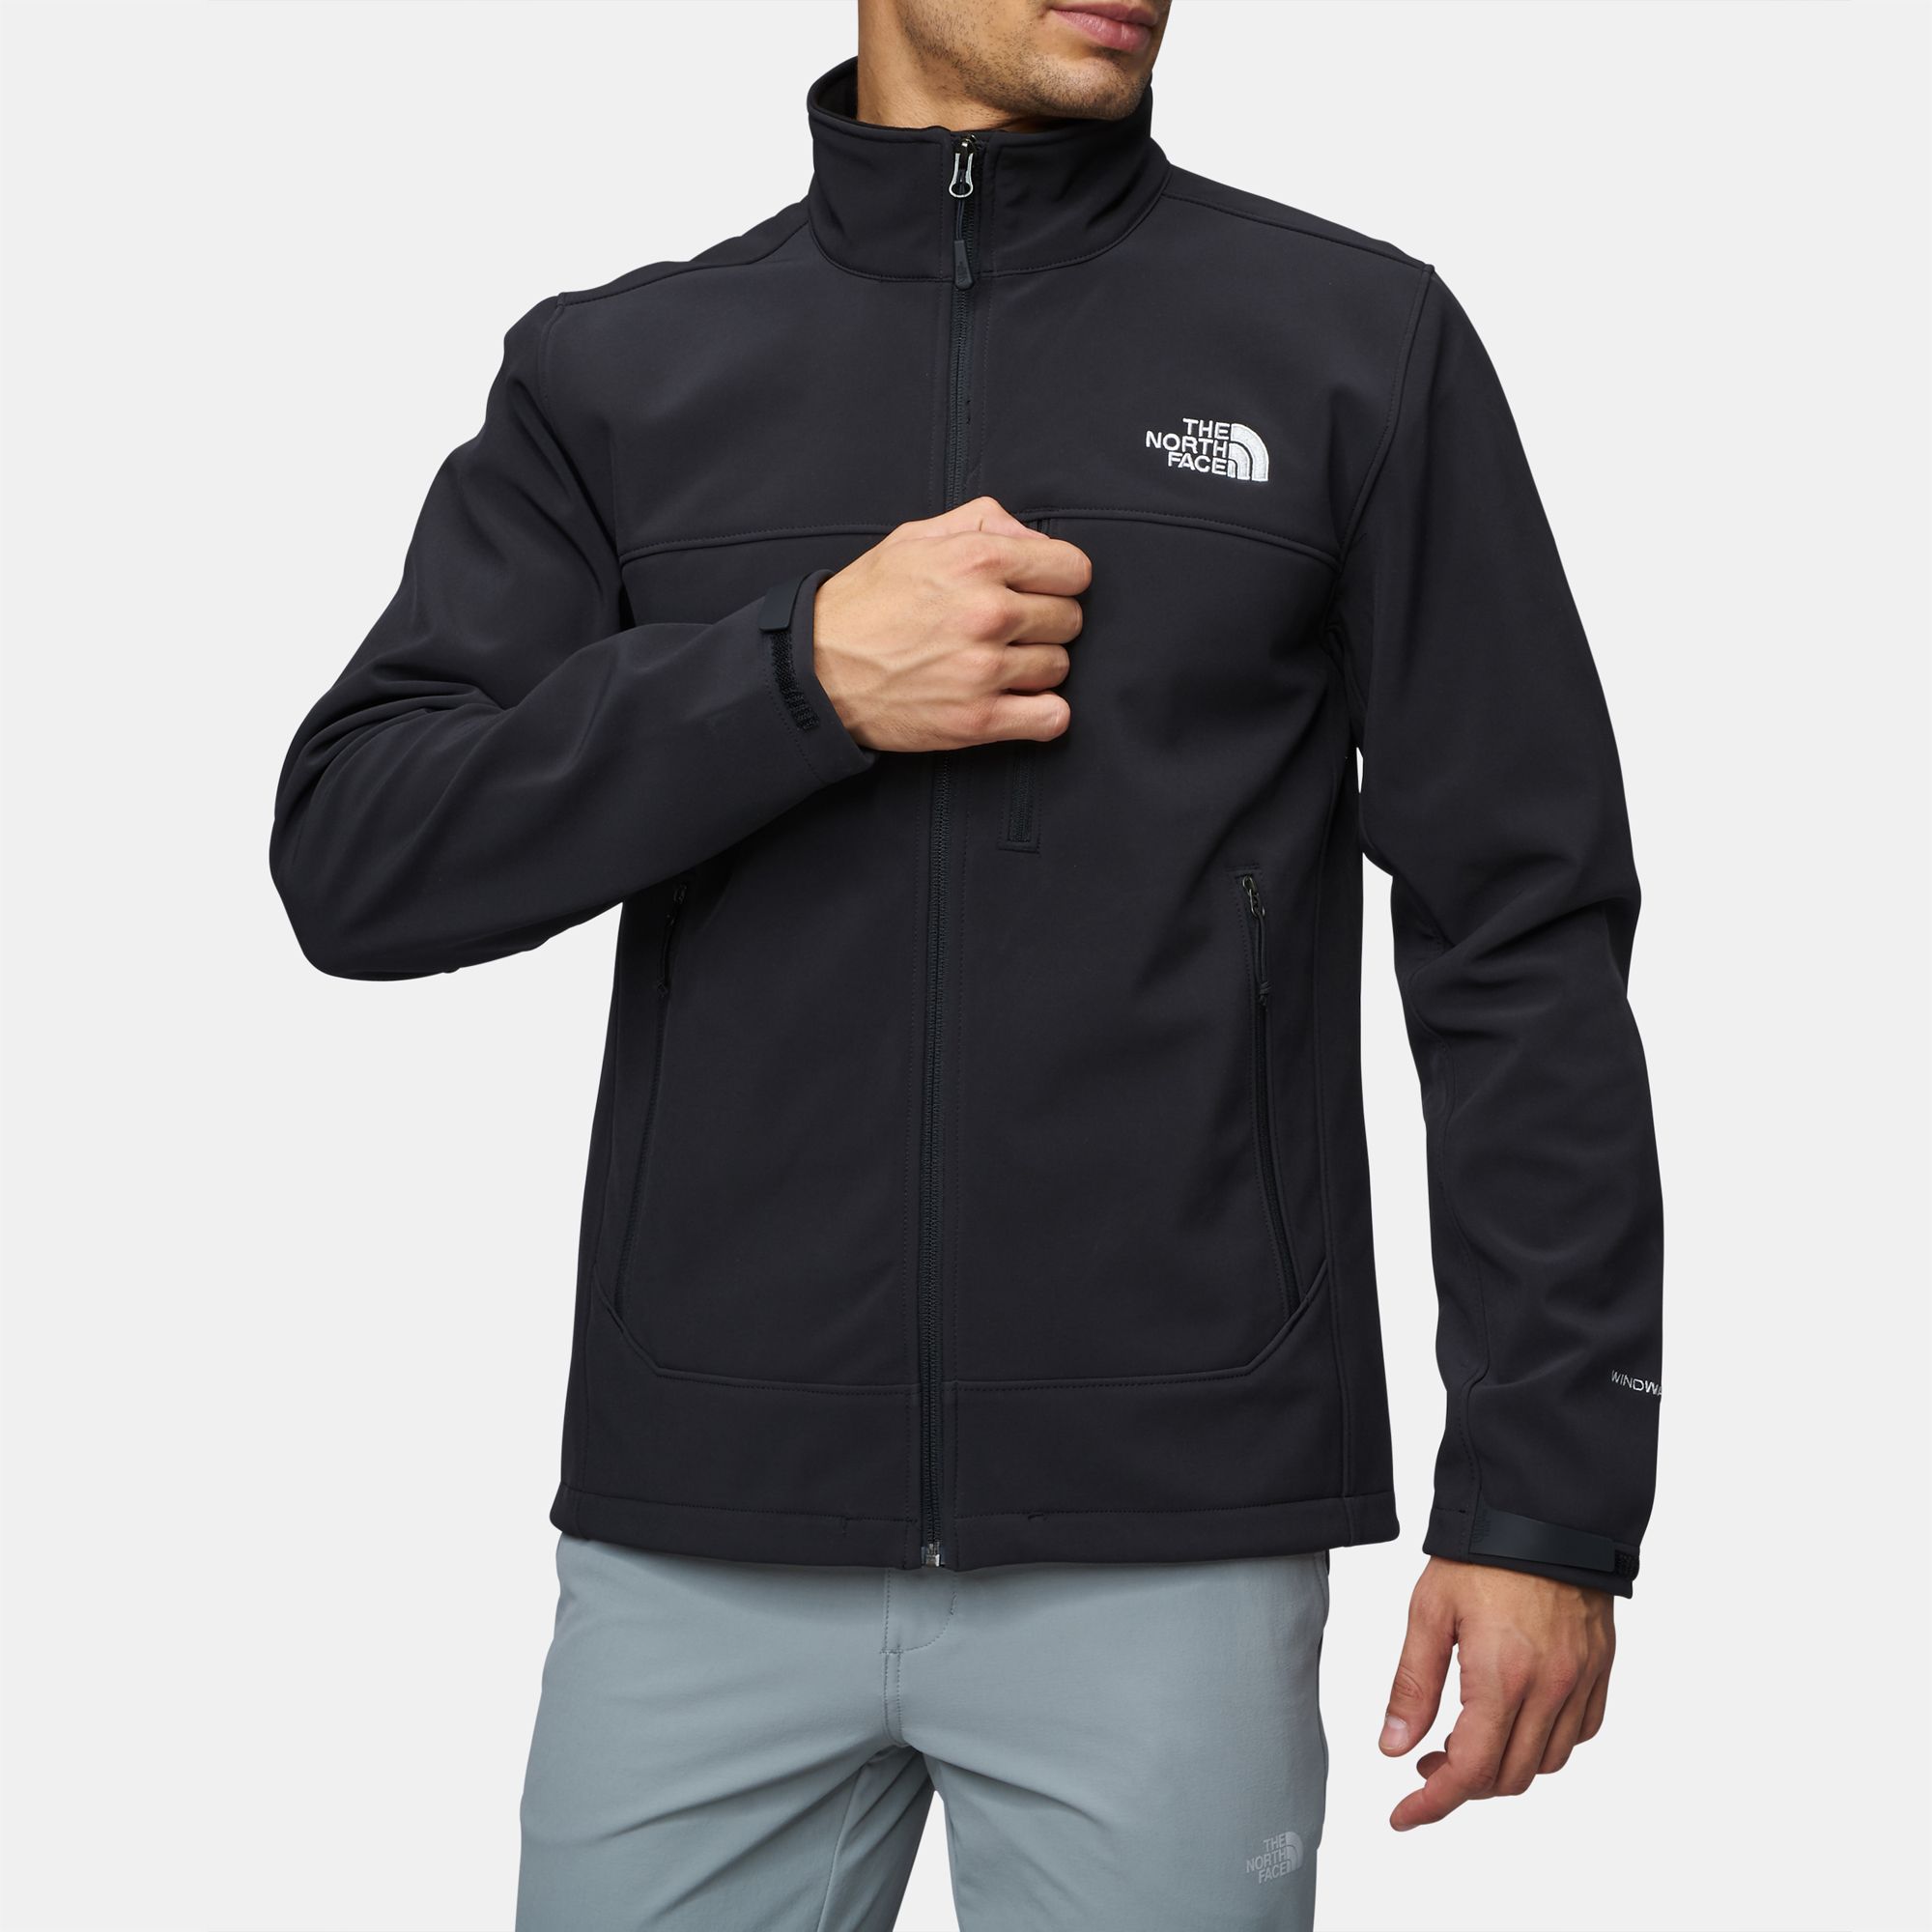 north face apex 2 bionic jacket Online 